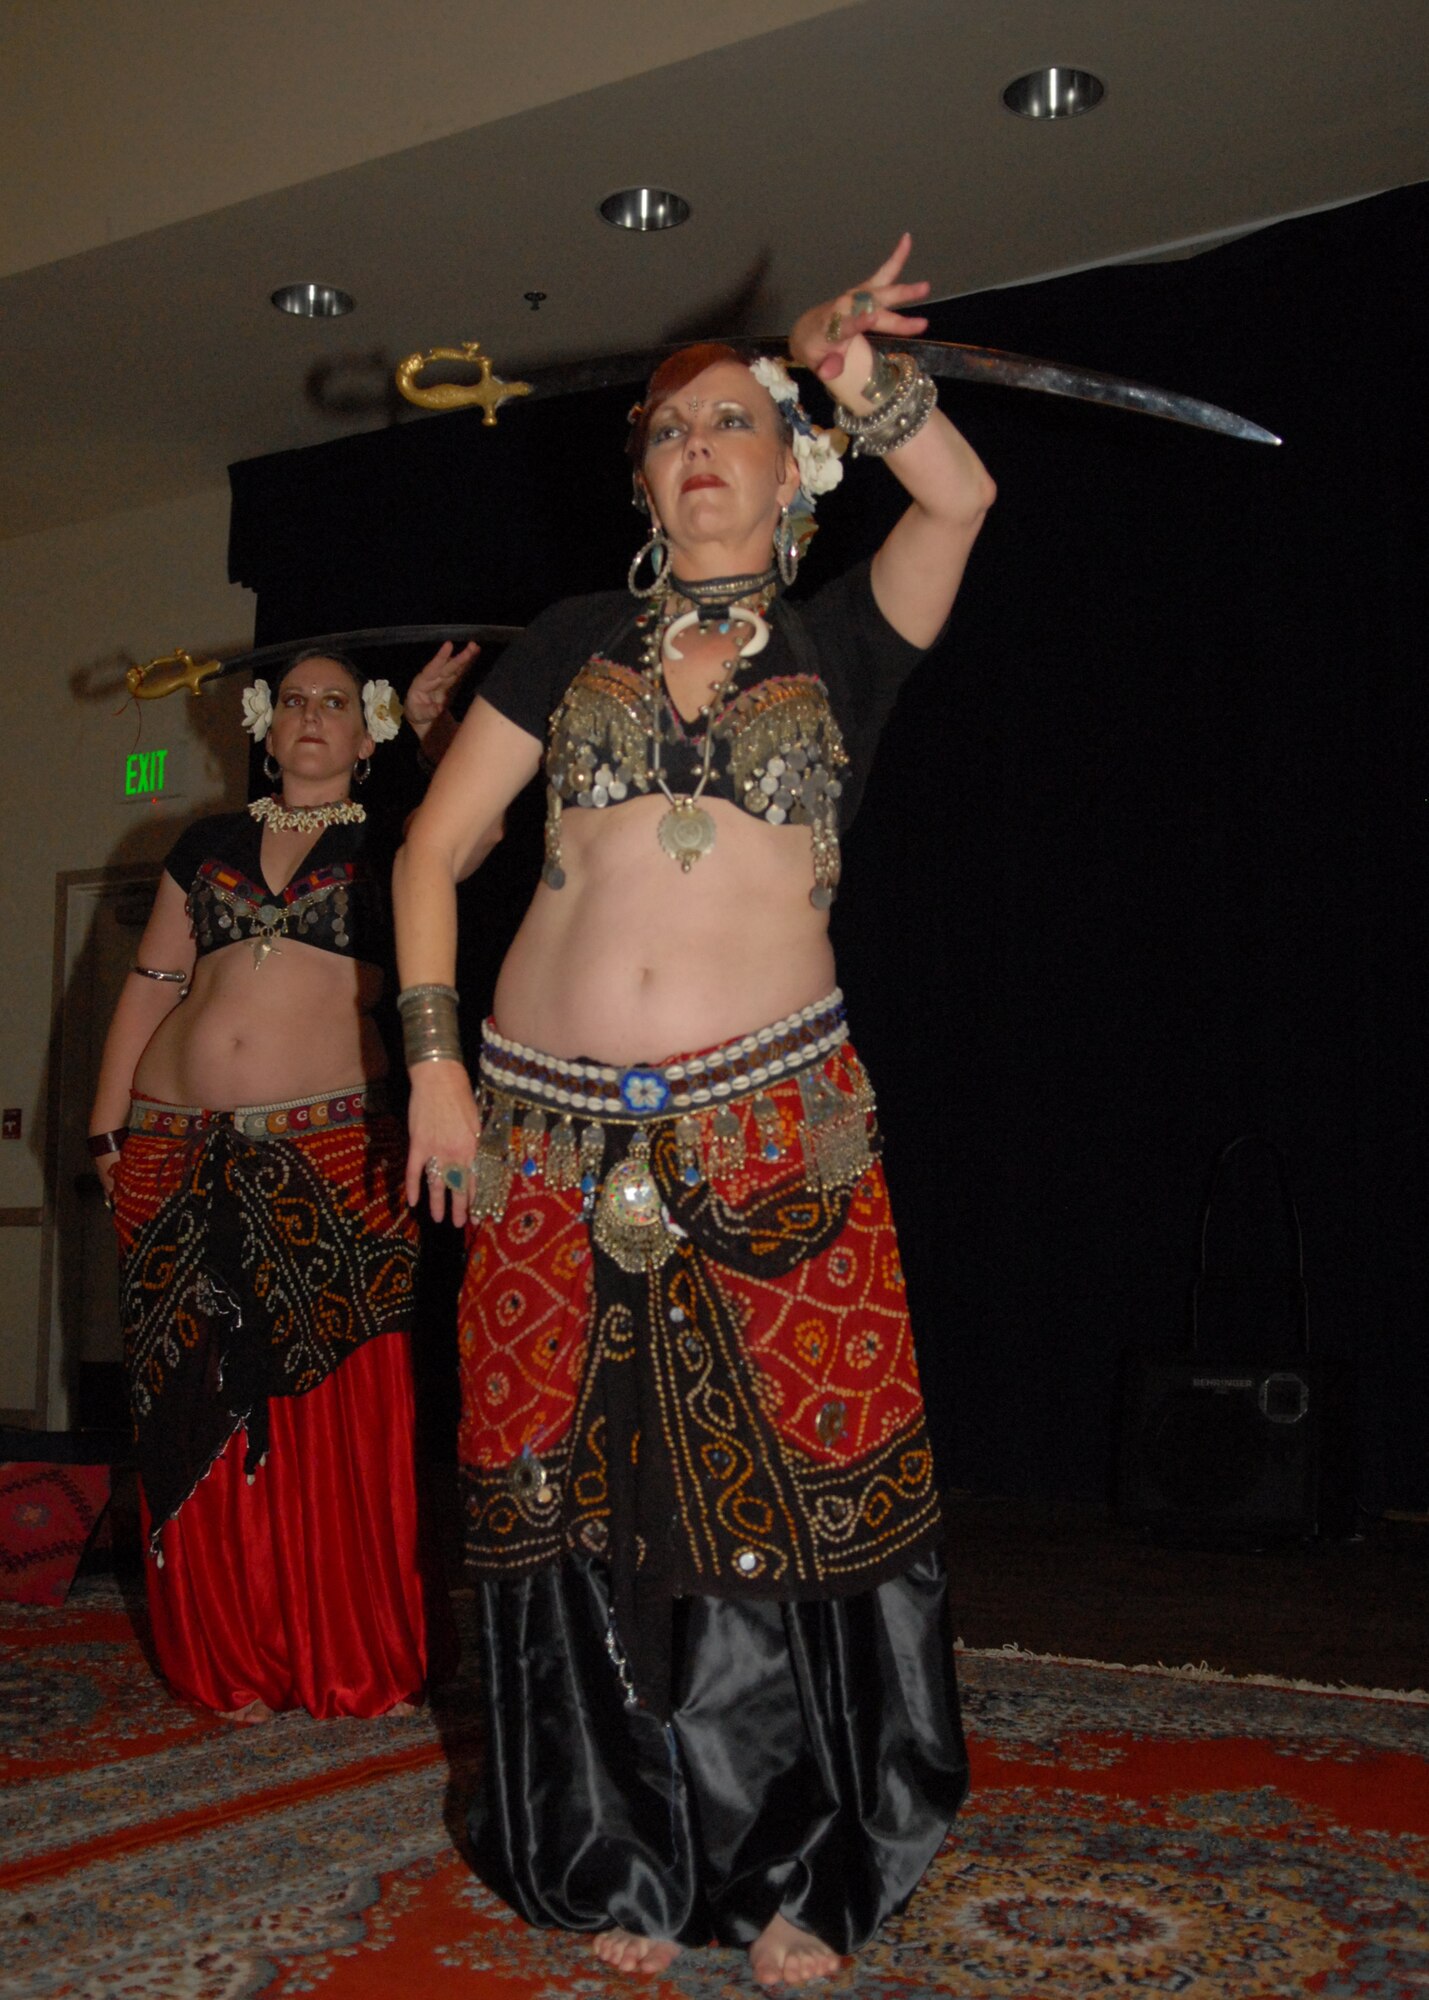 VANDENBERG AIR FORCE BASE, Calif. -- Passport to Turkey, the first event of its kind at Vandenberg, was a dinner held by the Pacific Coast Club which featured tribal fusion belly dancers Teresa Phillips and Bonnie Wolf-Moss, here, Friday, Nov. 6, 2009. The dancers displayed their dance style, a combination of Indian, African and other types of dance, as well as their handmade garments worn in traditional tribes. (U.S. Air Force photo/Airman 1st Class Angelina Drake)